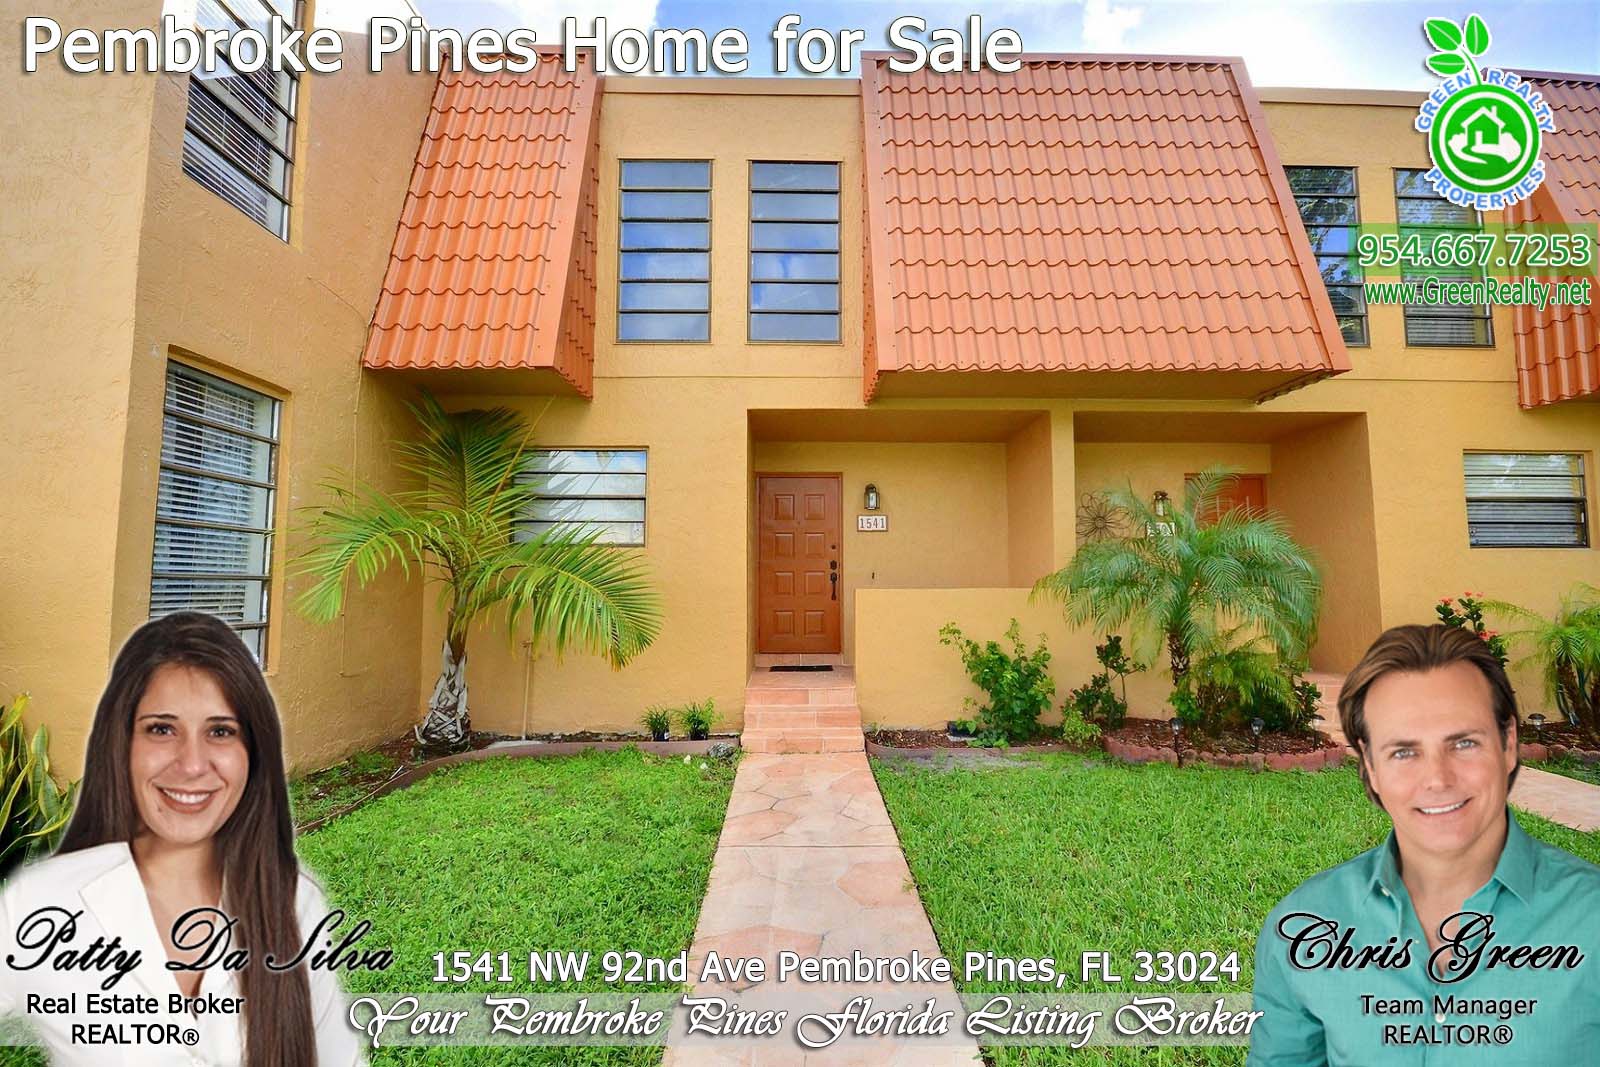 Homes For Sale in Pembroke Pines